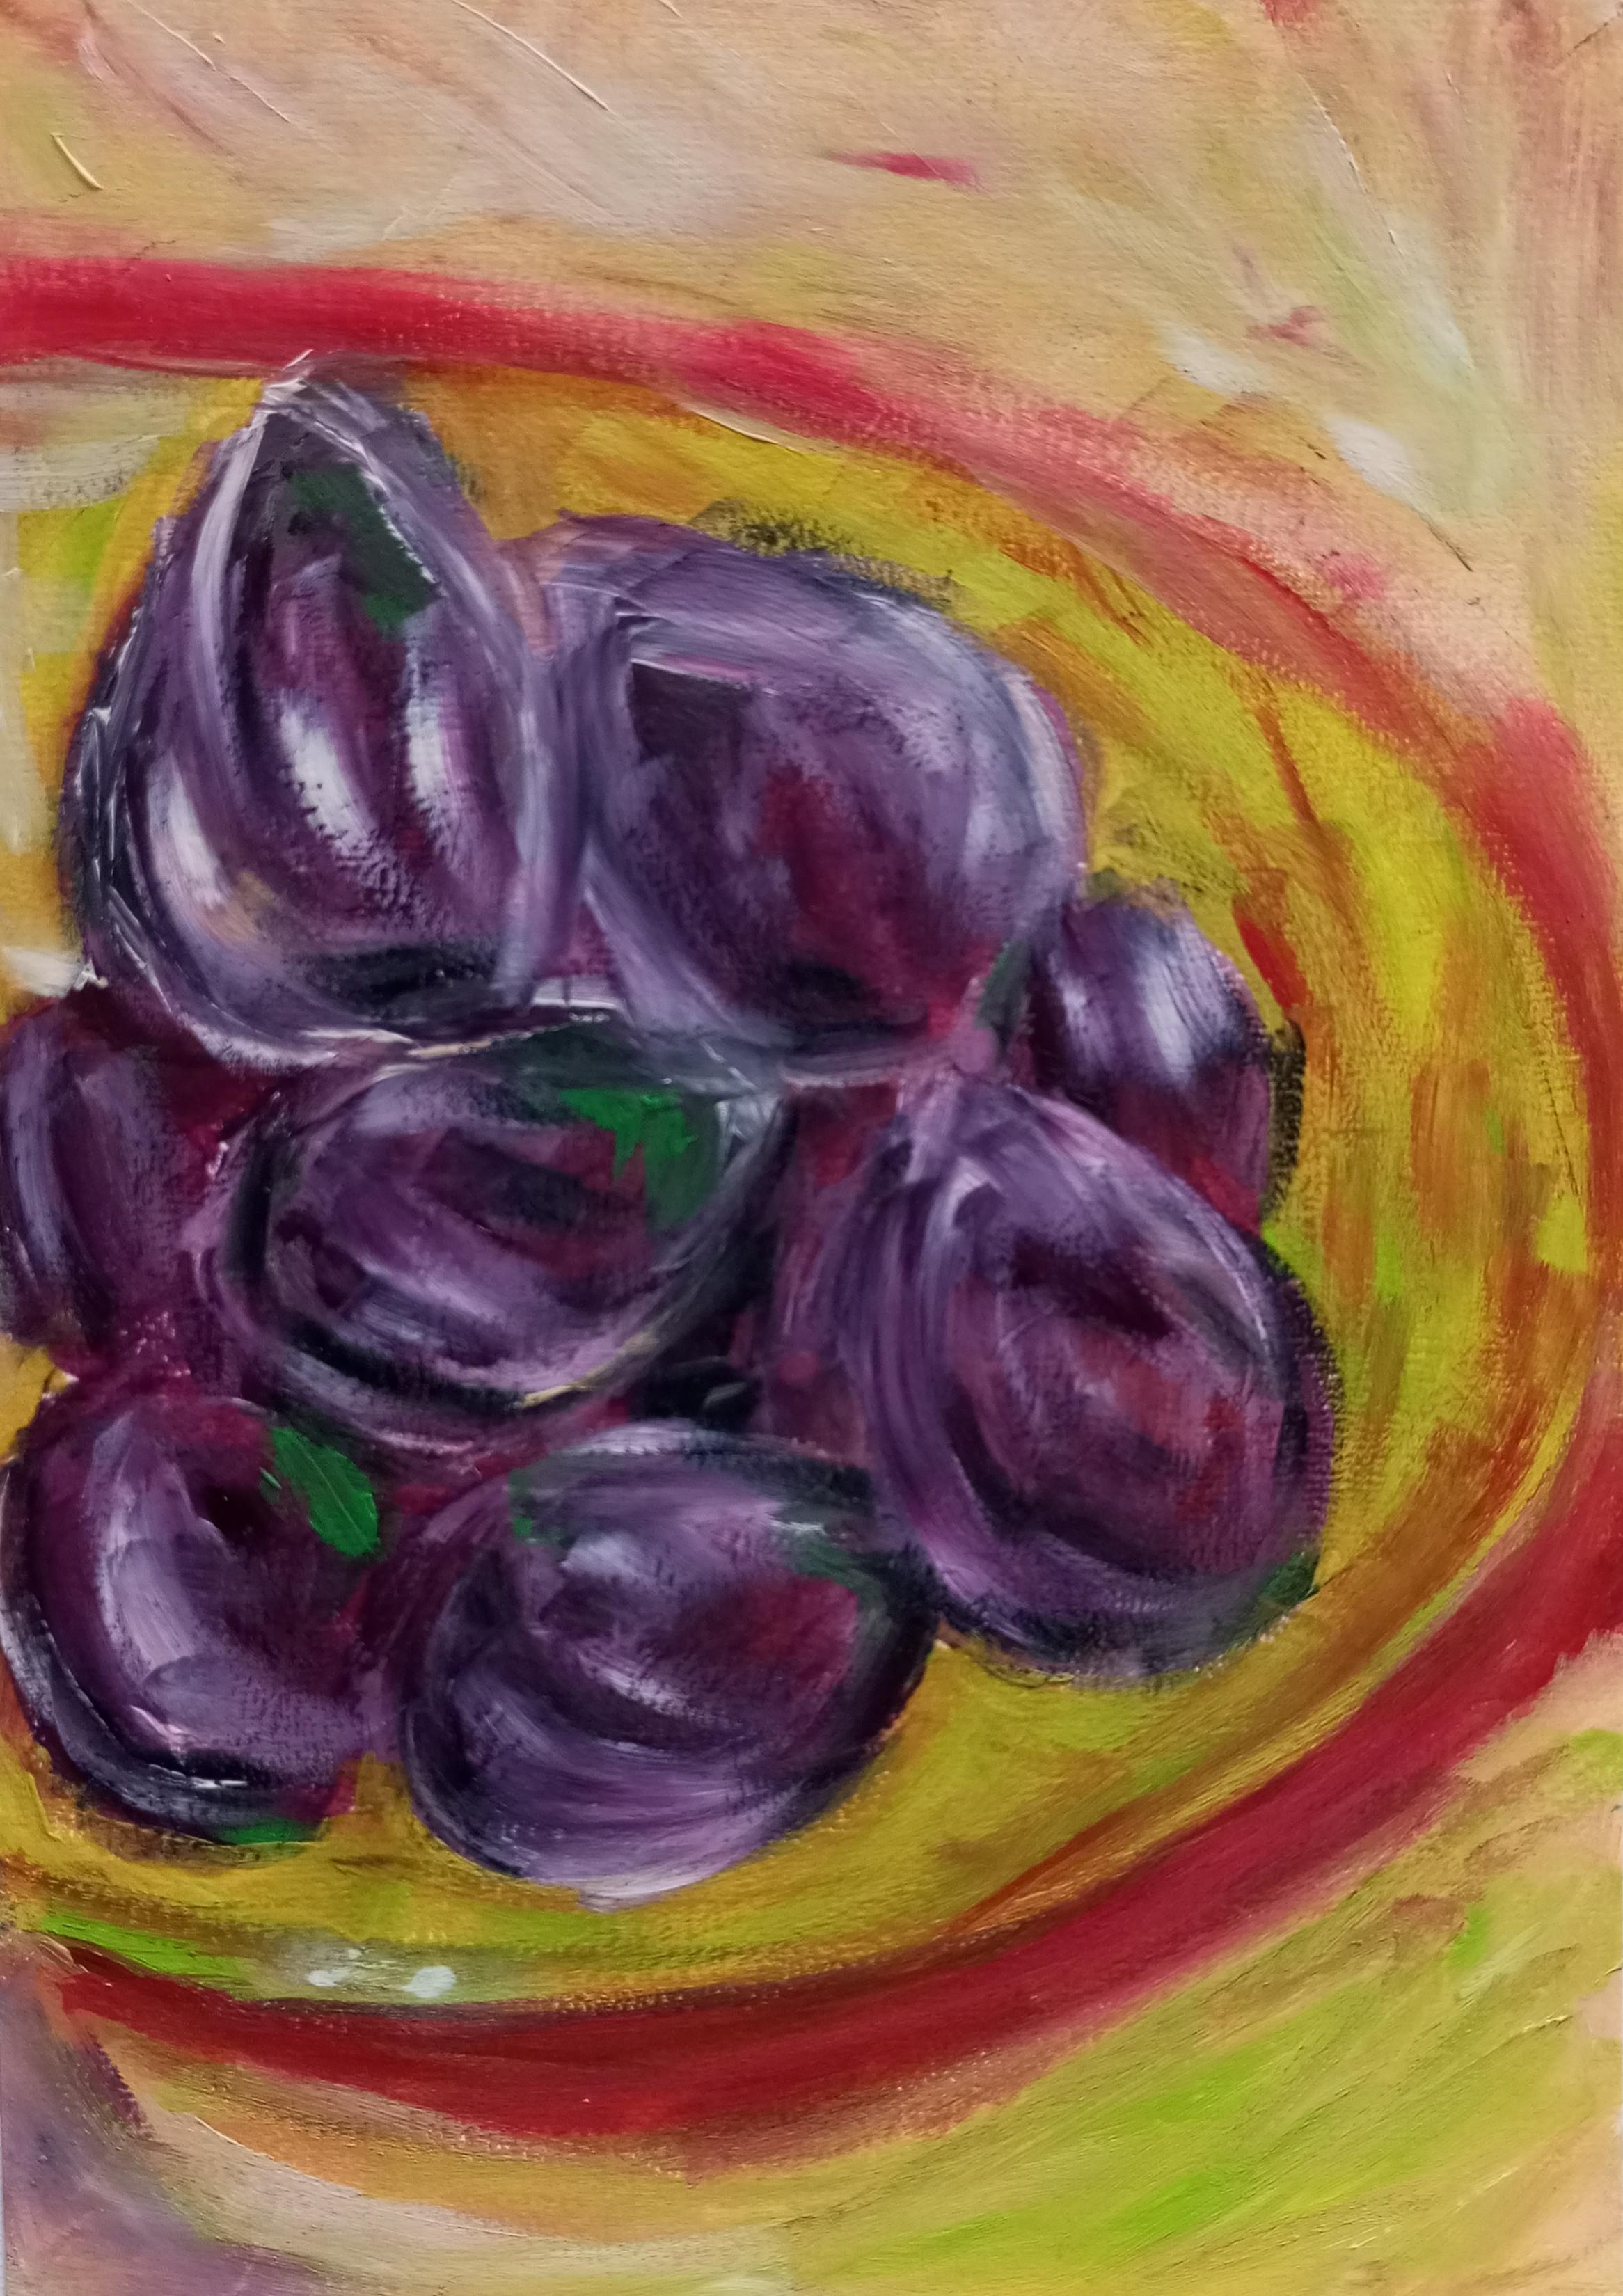 "Summer treat" : figs in a bowl  oil painting on paper